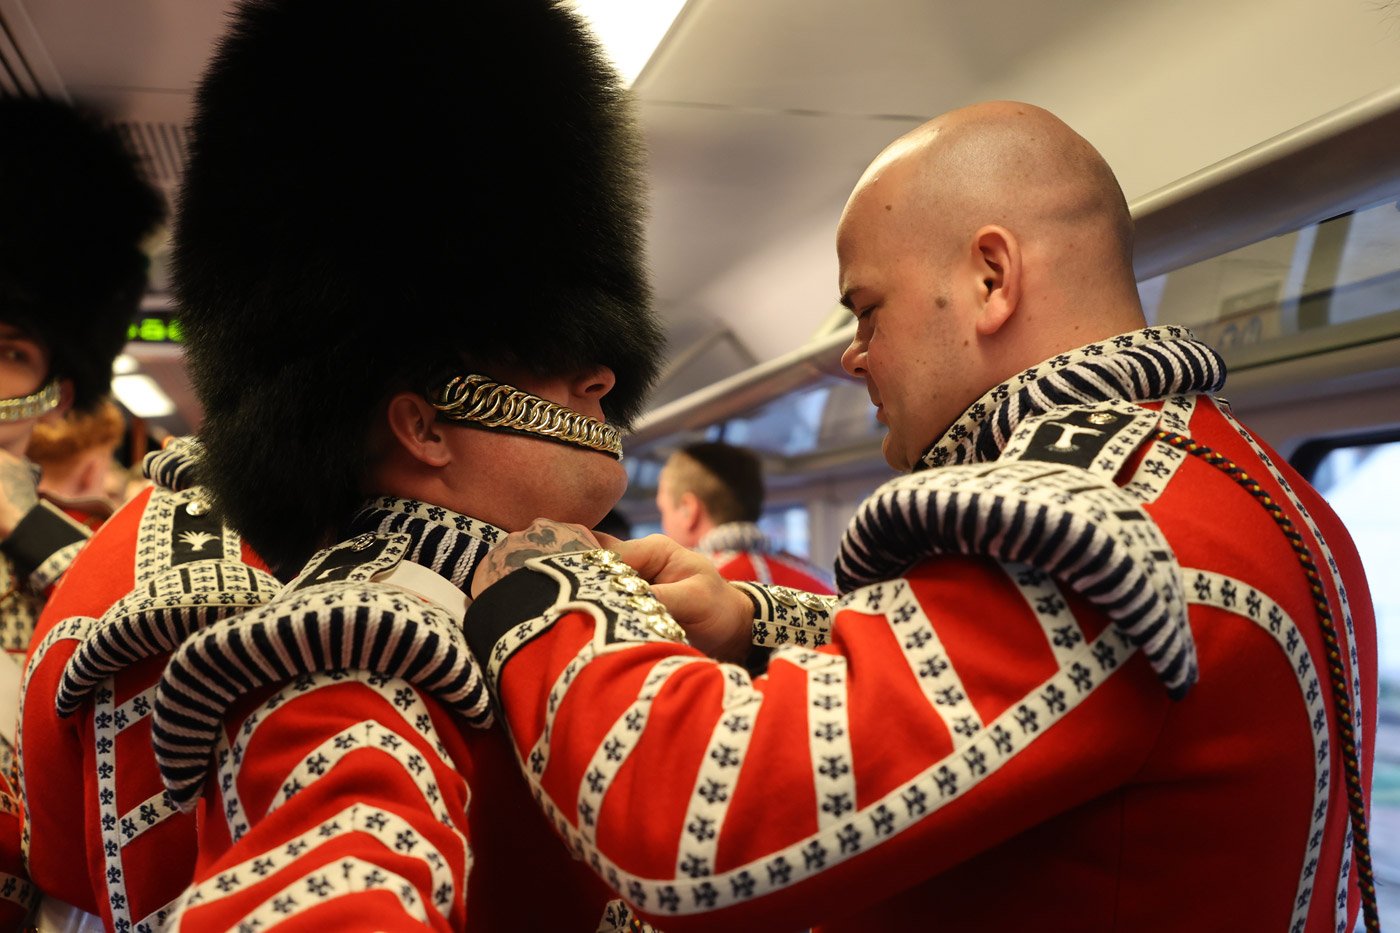 A member of the Armed Forces has his uniform adjusted on a train into London